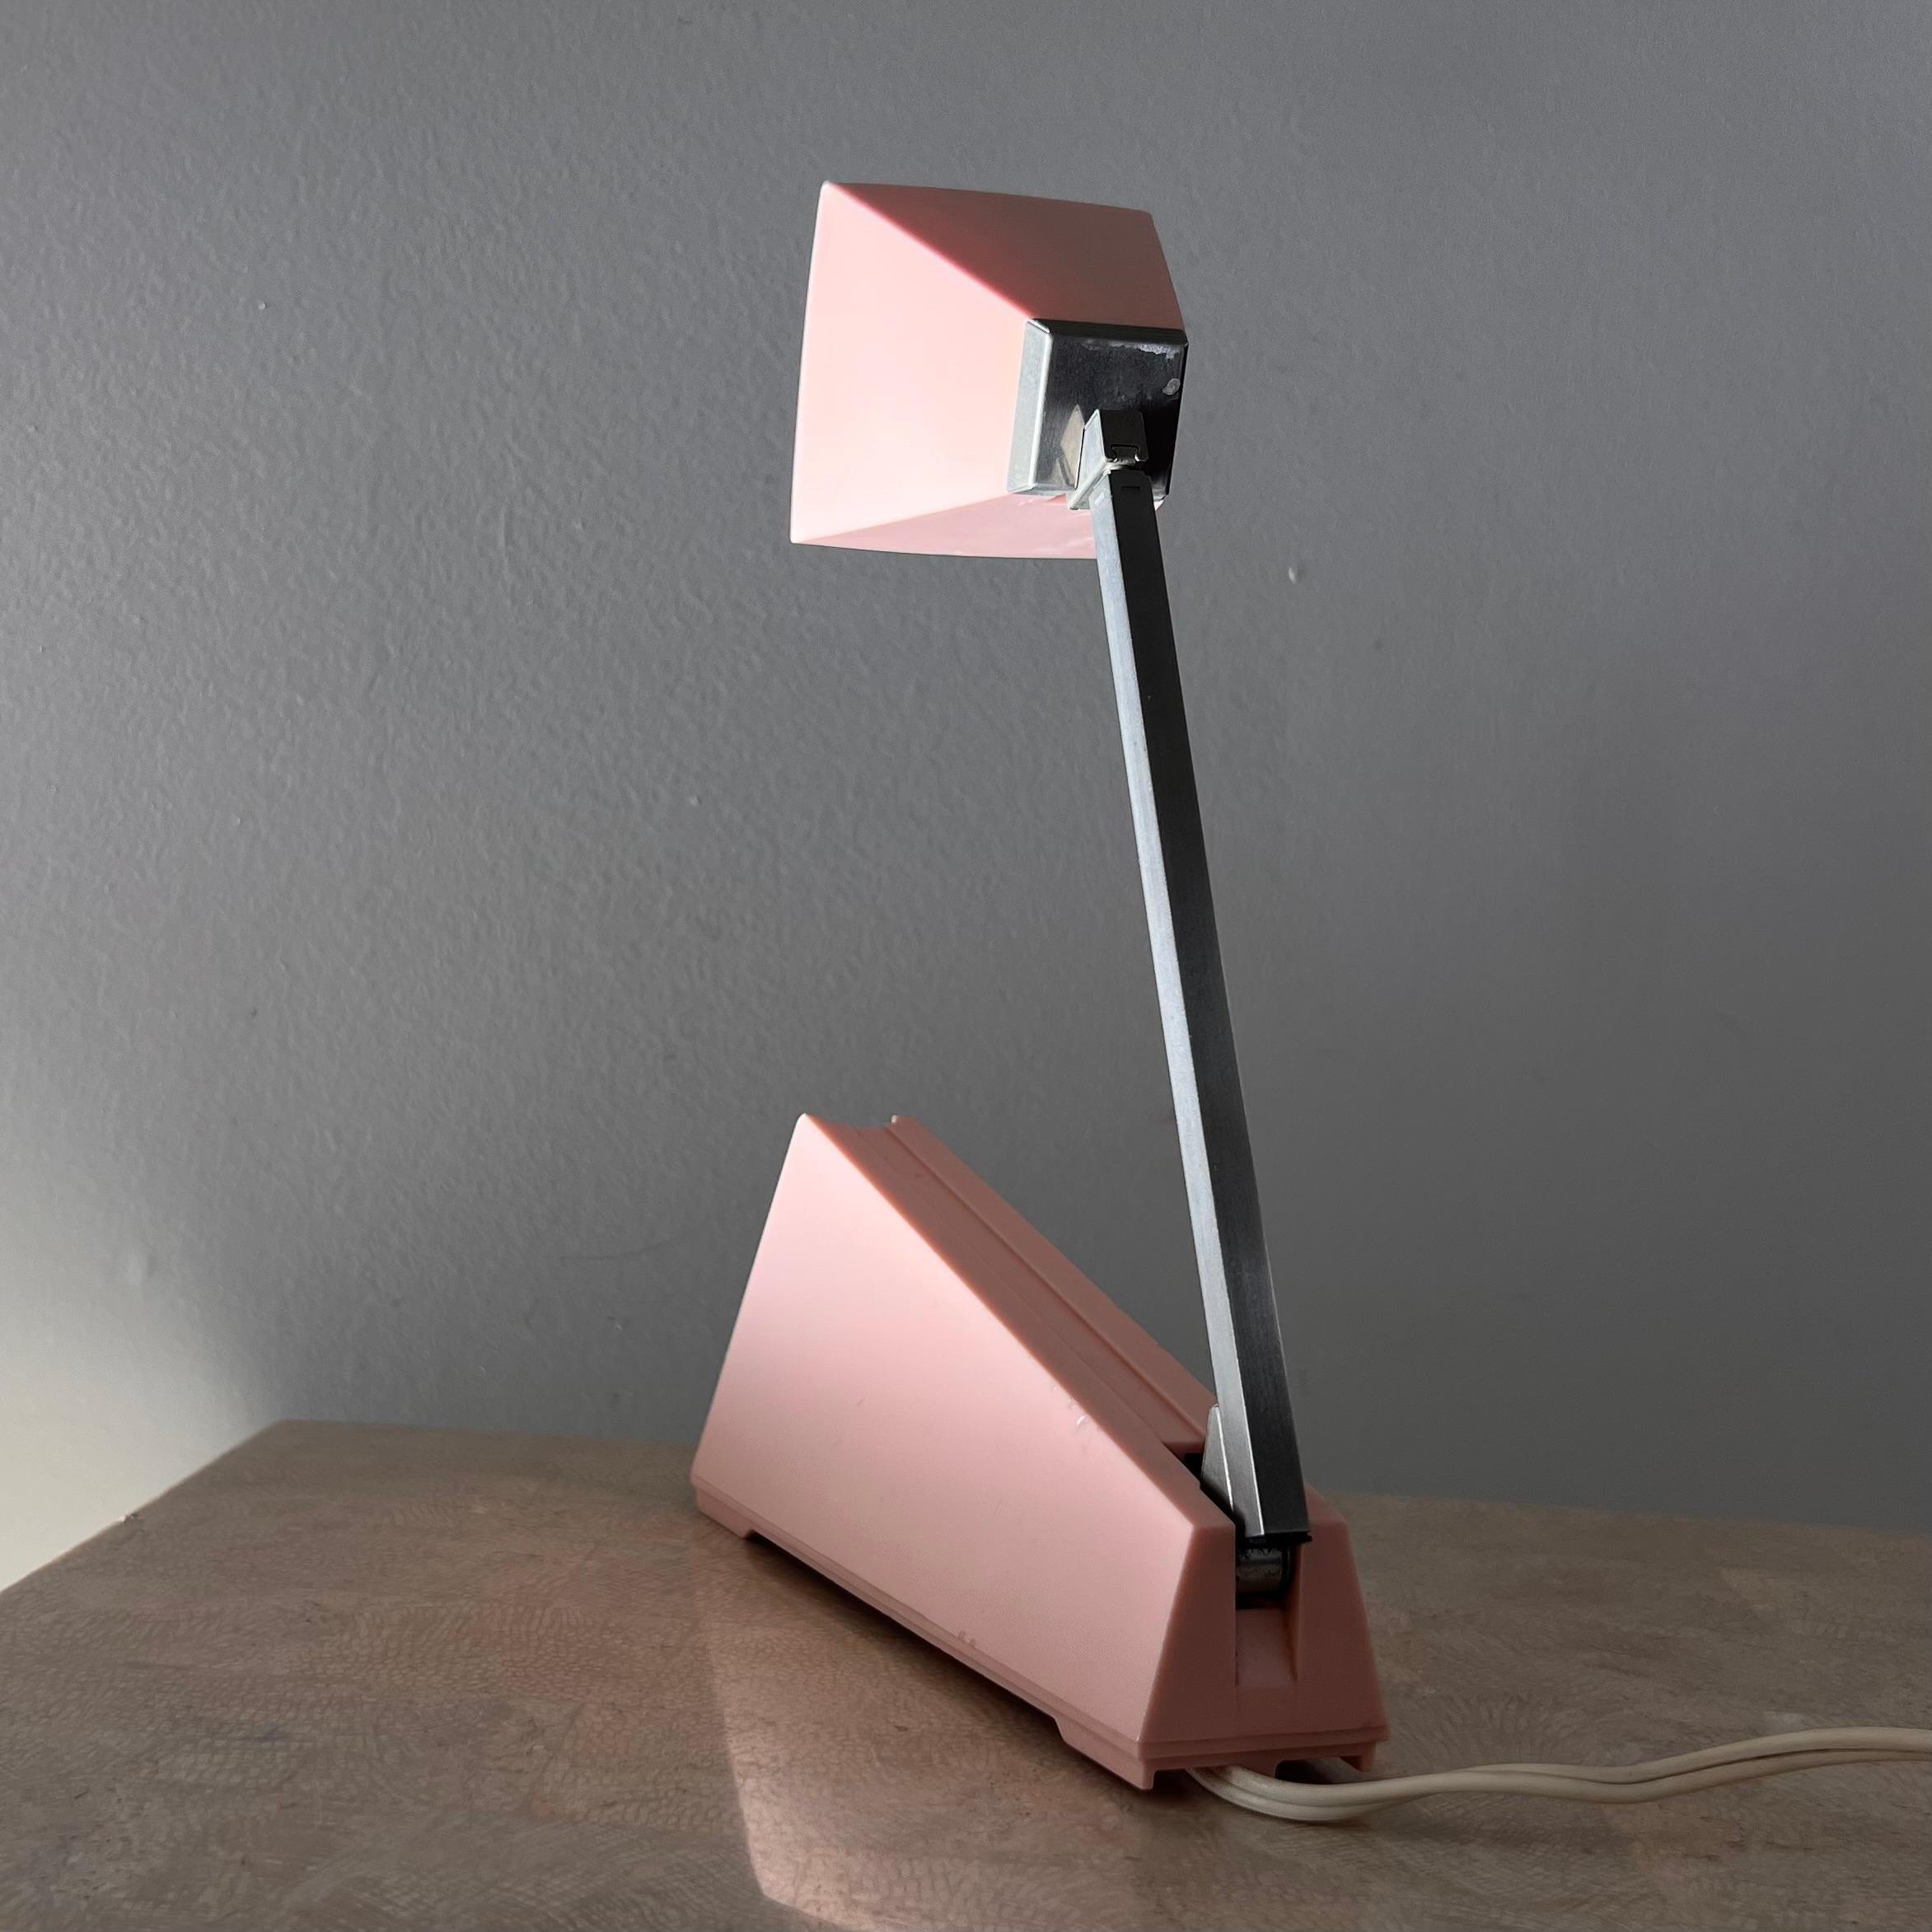 Vintage chrome and pink “Lampette” task lamp by Koch, 1964 For Sale 11